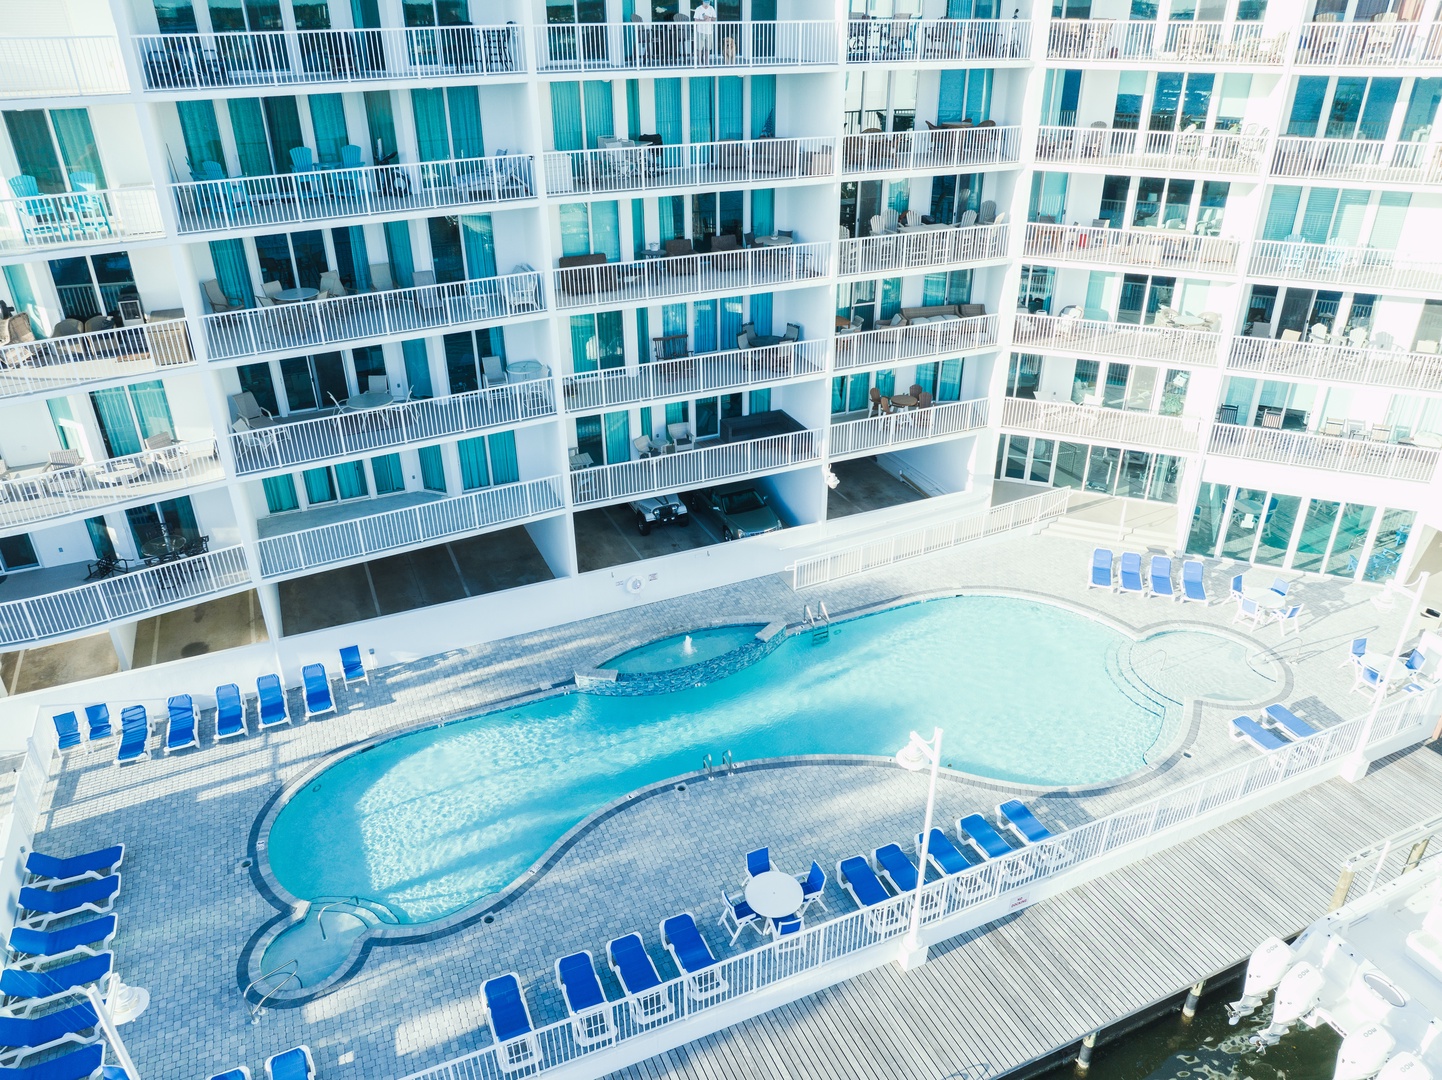 Cool down in the outdoor pool or lounge poolside